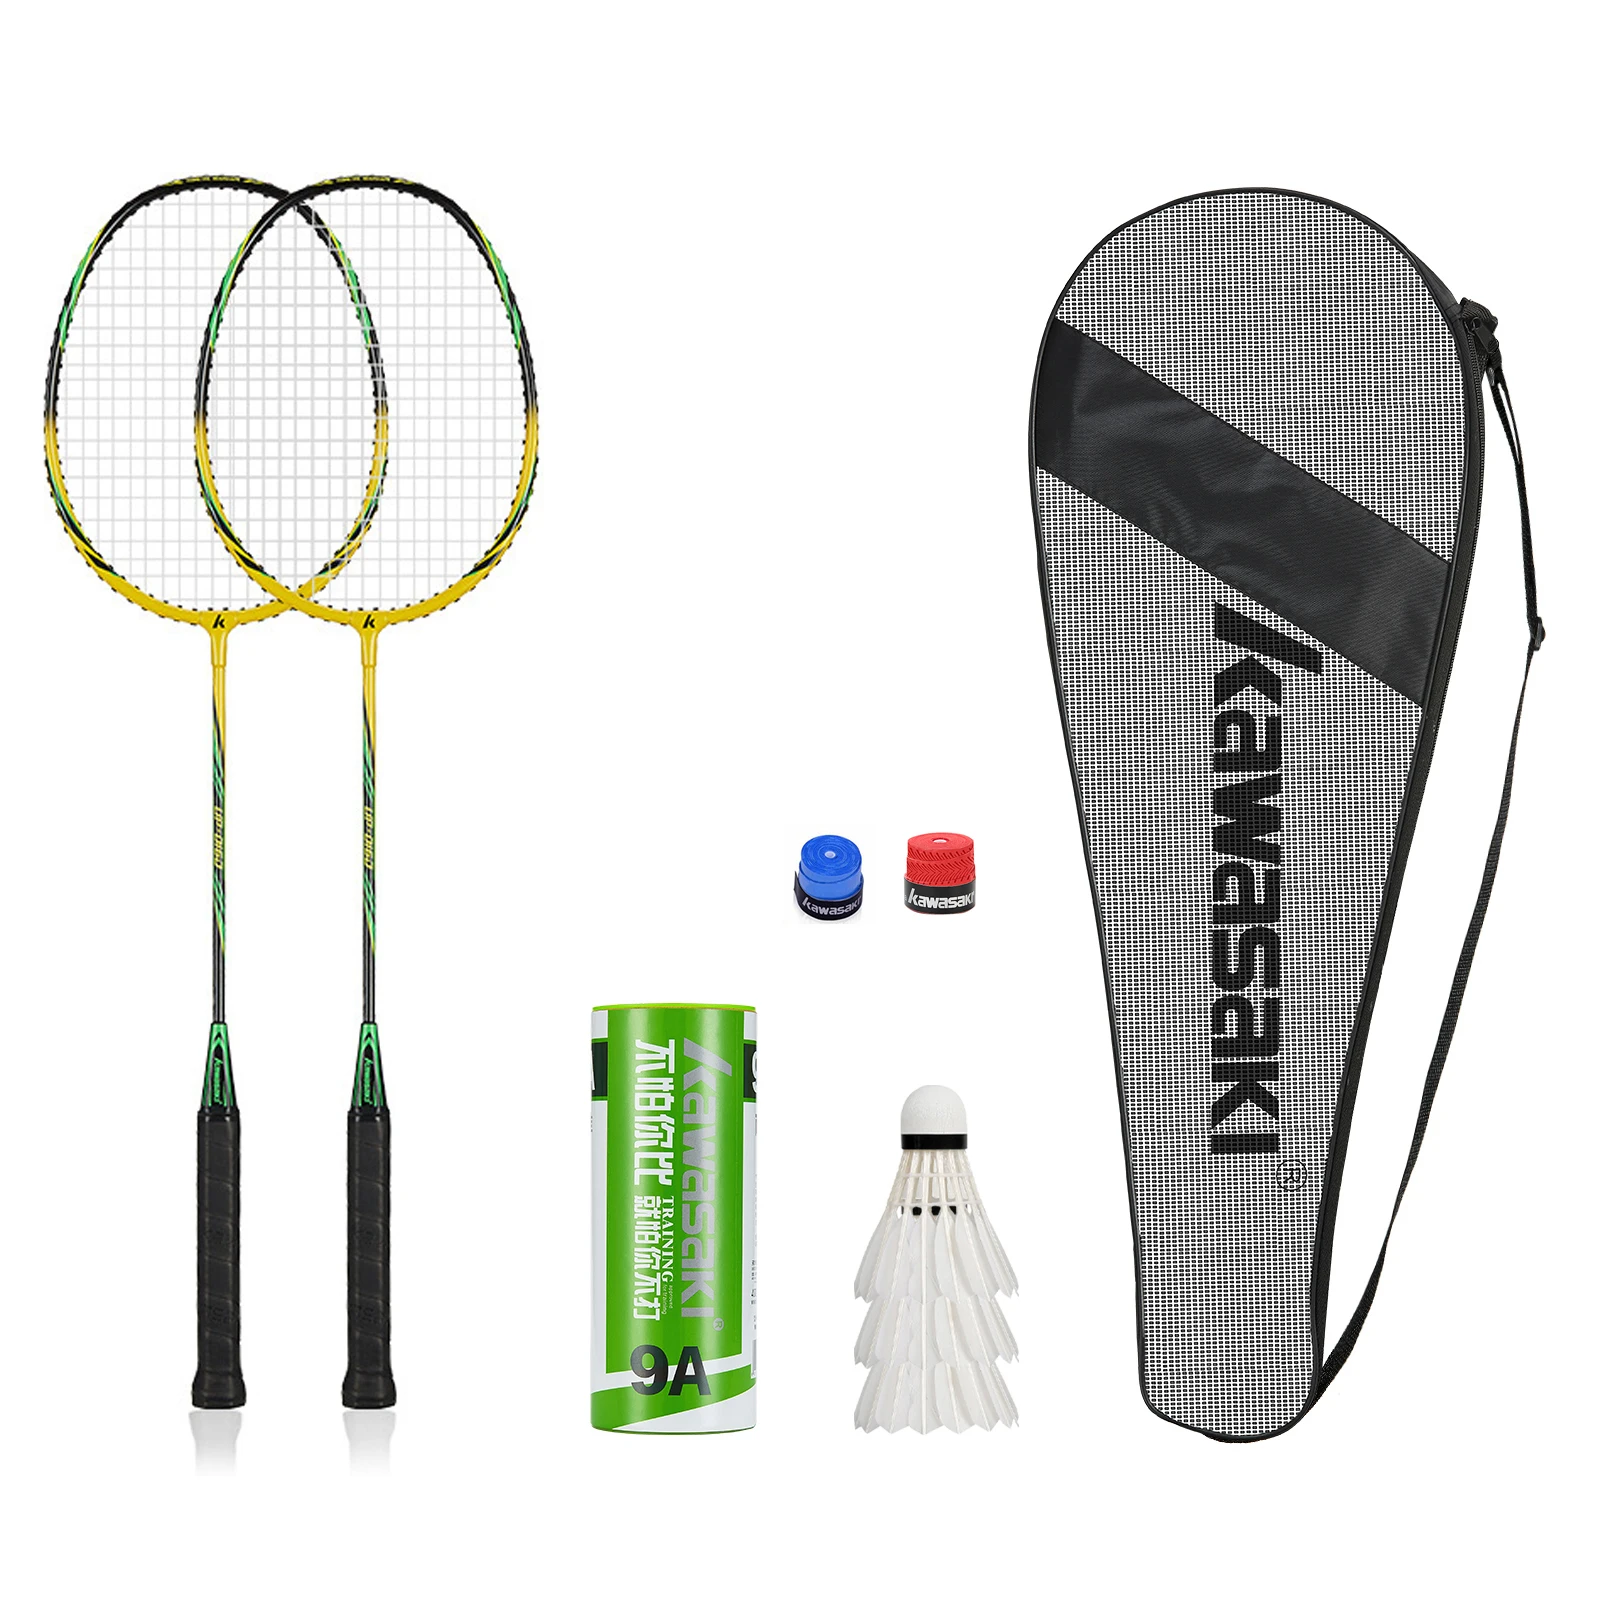 Aluminum Alloy Material Quality Aluminum Alloy Service Life Quality Badminton Rackets with Aluminum Alloy Portable Badminton Racket